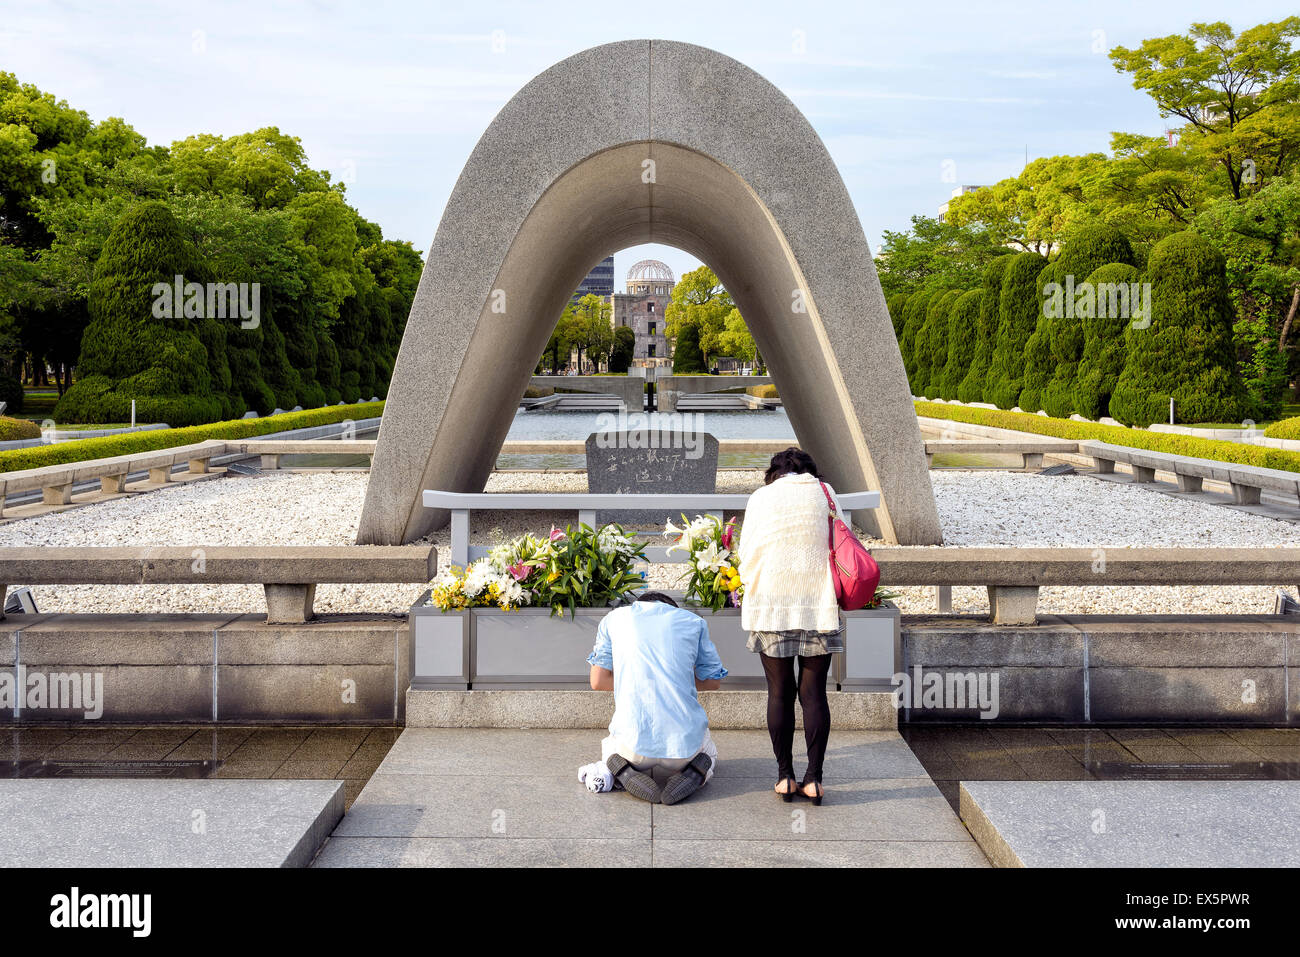 Hiroshima, Japan - April 27, 2014: View of a japanese couple in prayer in front of the Cenotaph in Peace Park. Stock Photo